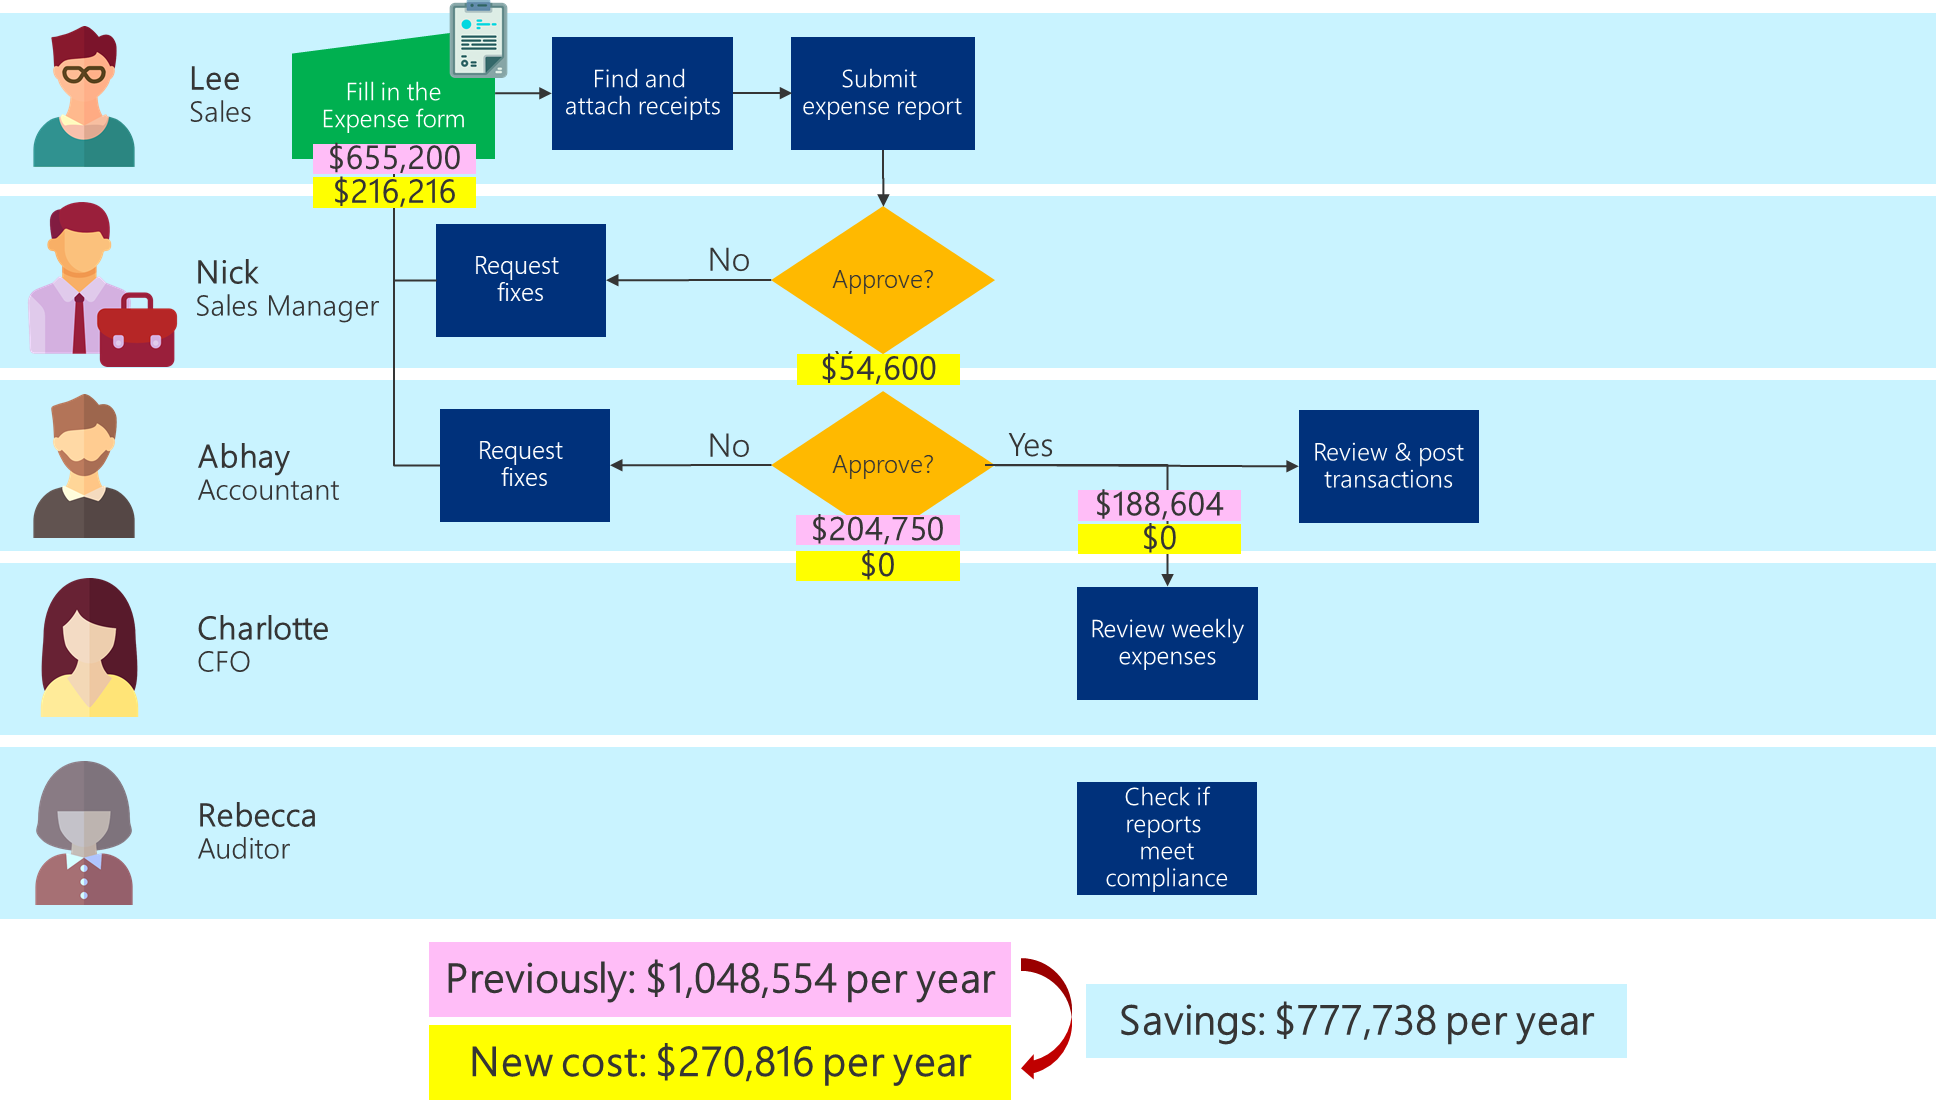 Business process flowchart showing the updated costs for the optimized process and the total savings to be gained.